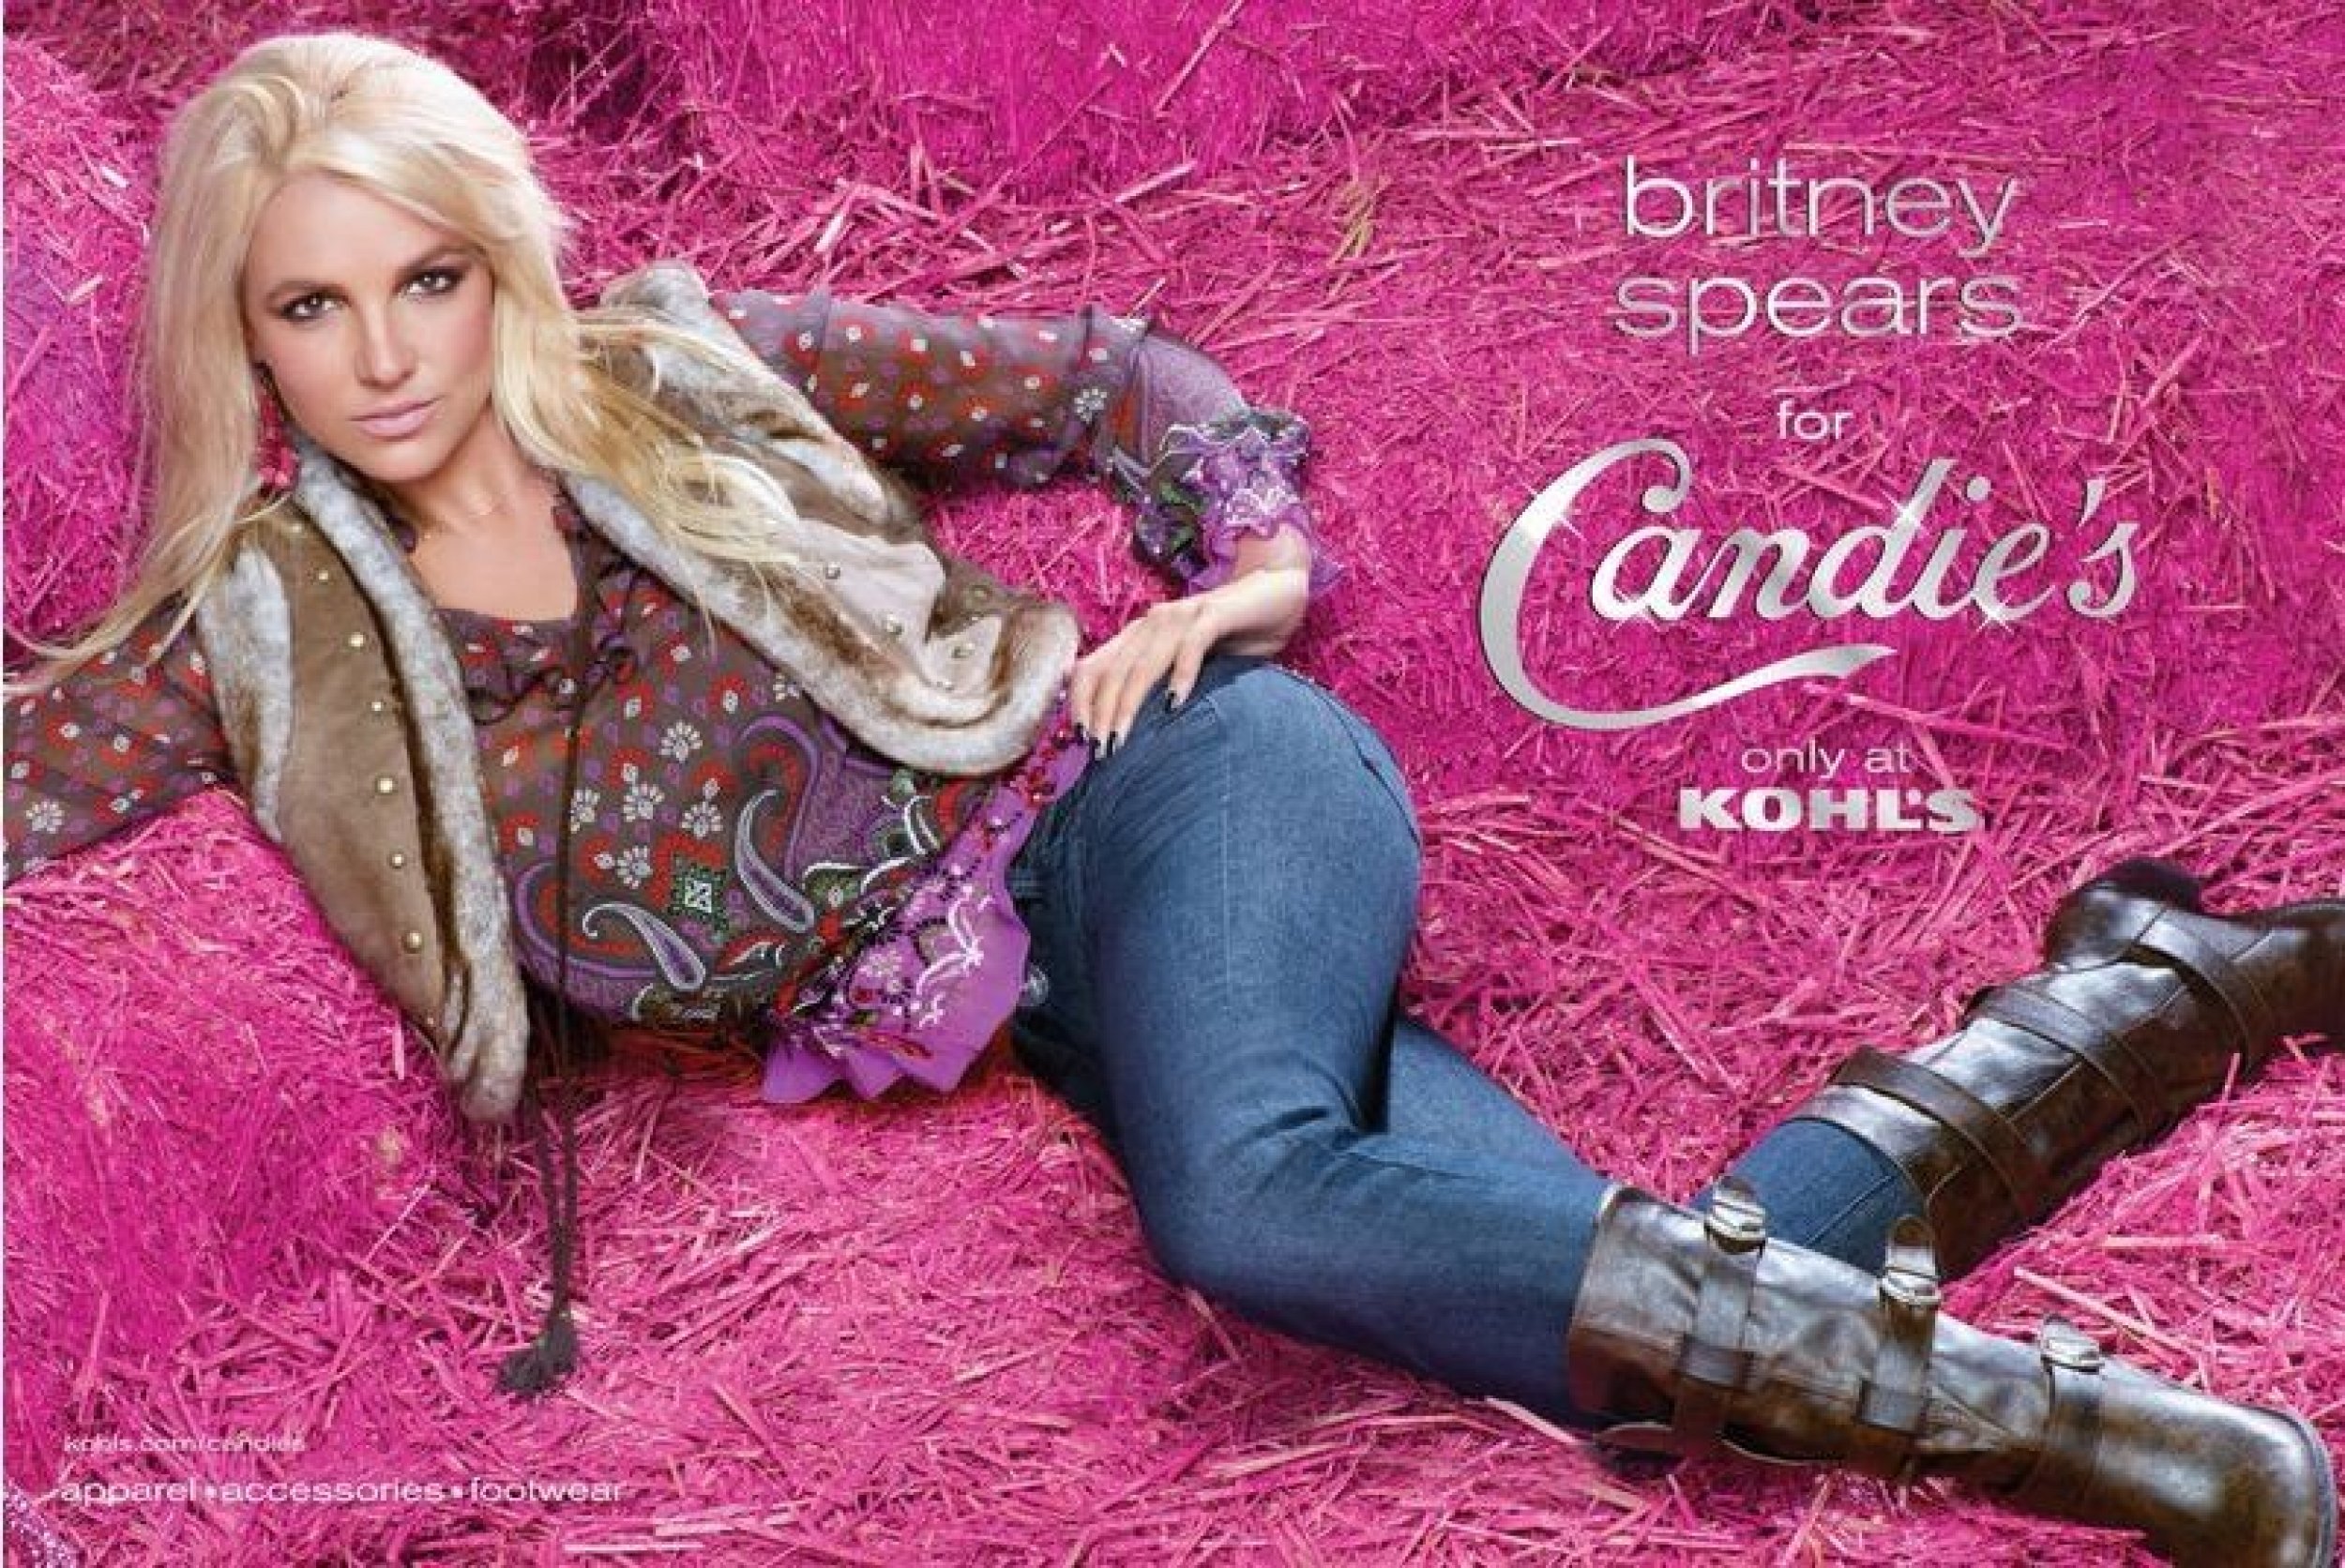 Vanessa Hudgens Replaces Britney Spears As the New Face of Candie's ...